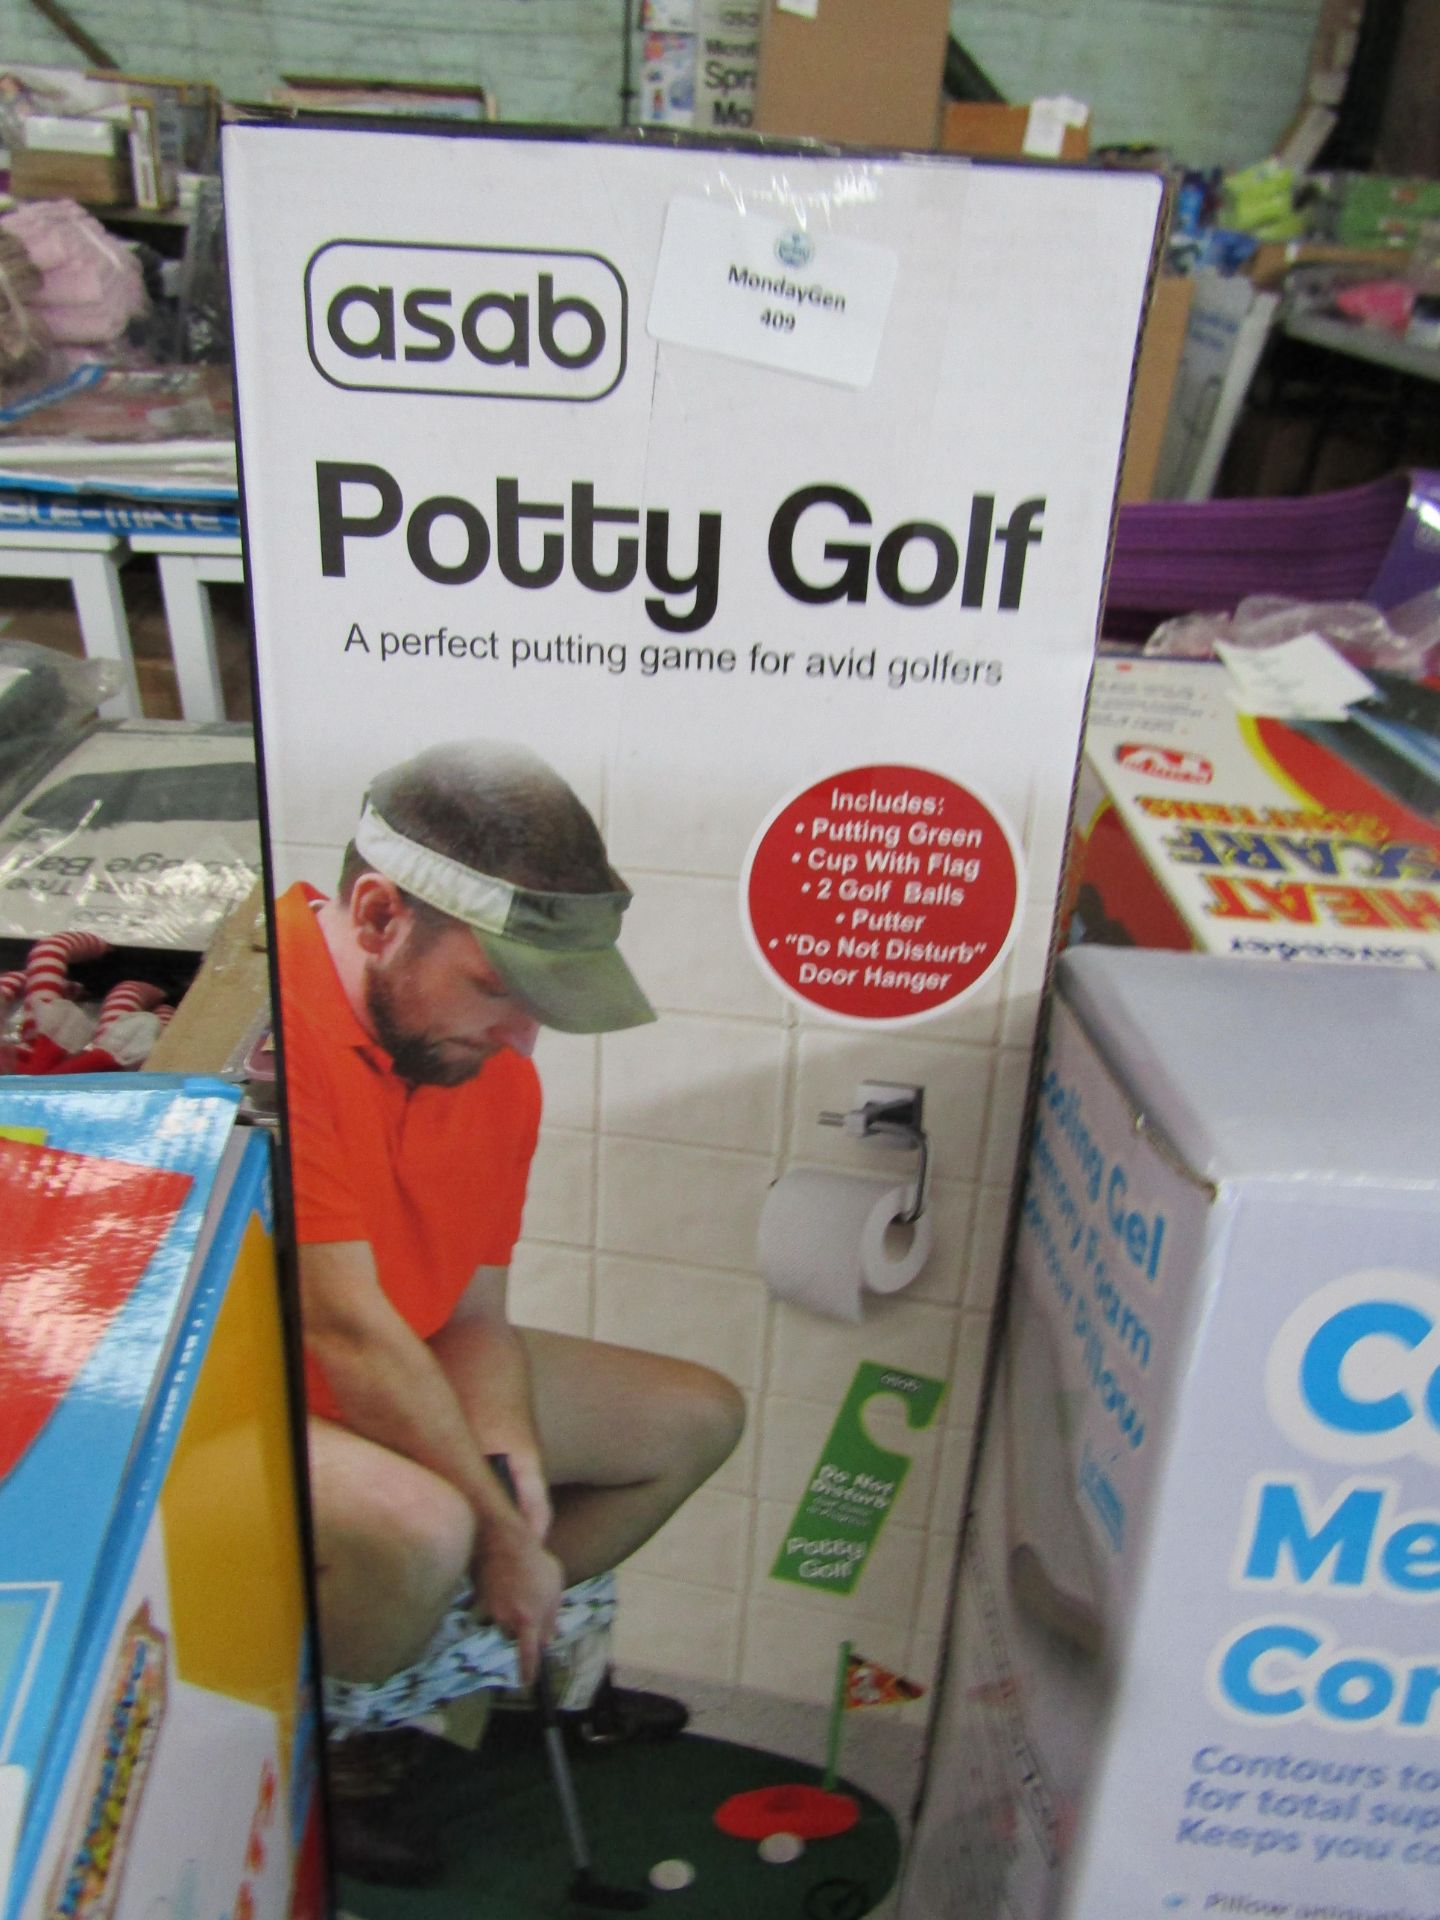 Asab - Toilet Potty Golf - Unchecked & Boxed.